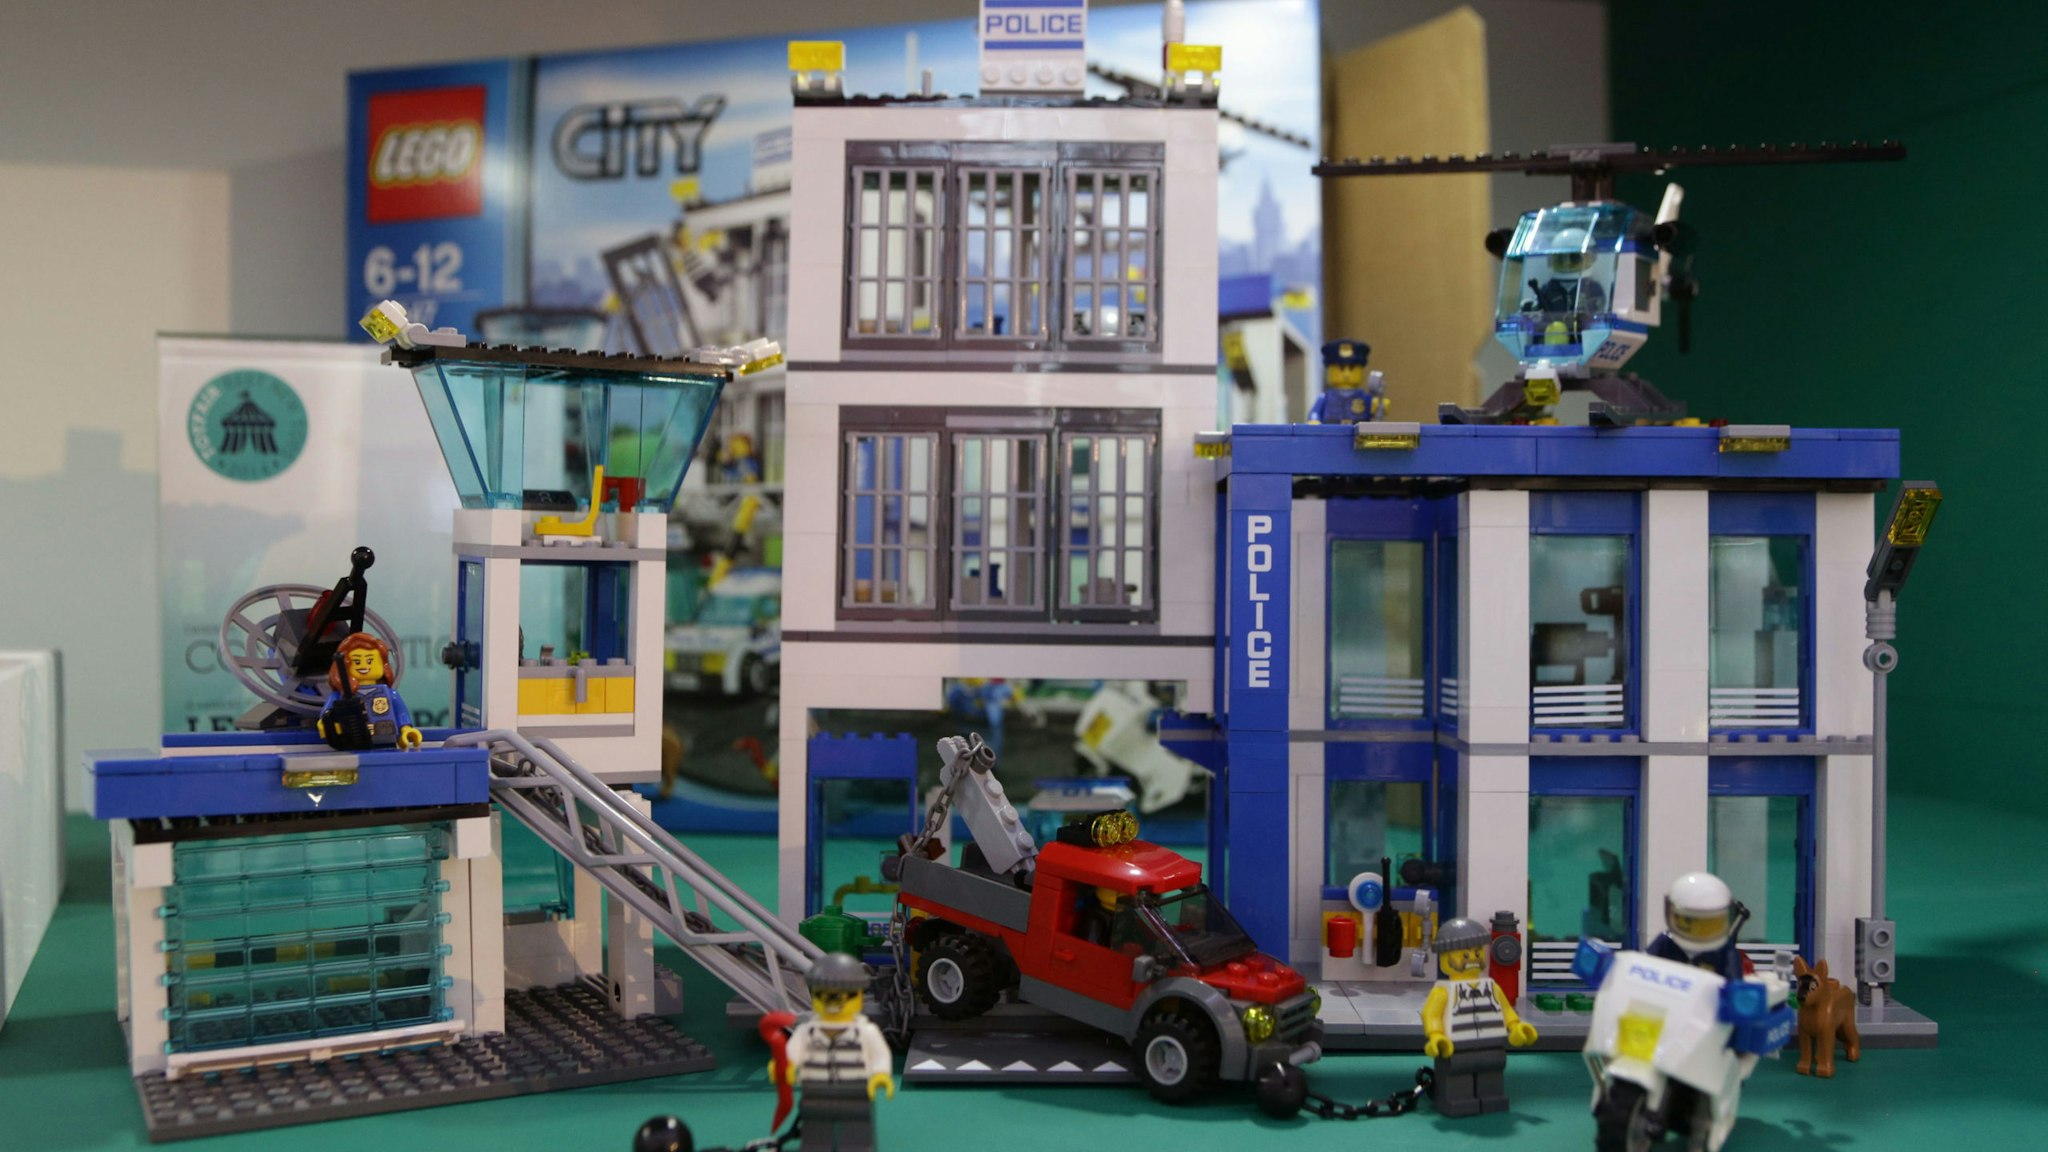 A Lego City Police Station set on display during the press day for the annual Toy Fair - where more than 280 companies launch thousands of brand new products to buyers and retailers - at Olympia in London. (Photo by Yui Mok/PA Images via Getty Images)